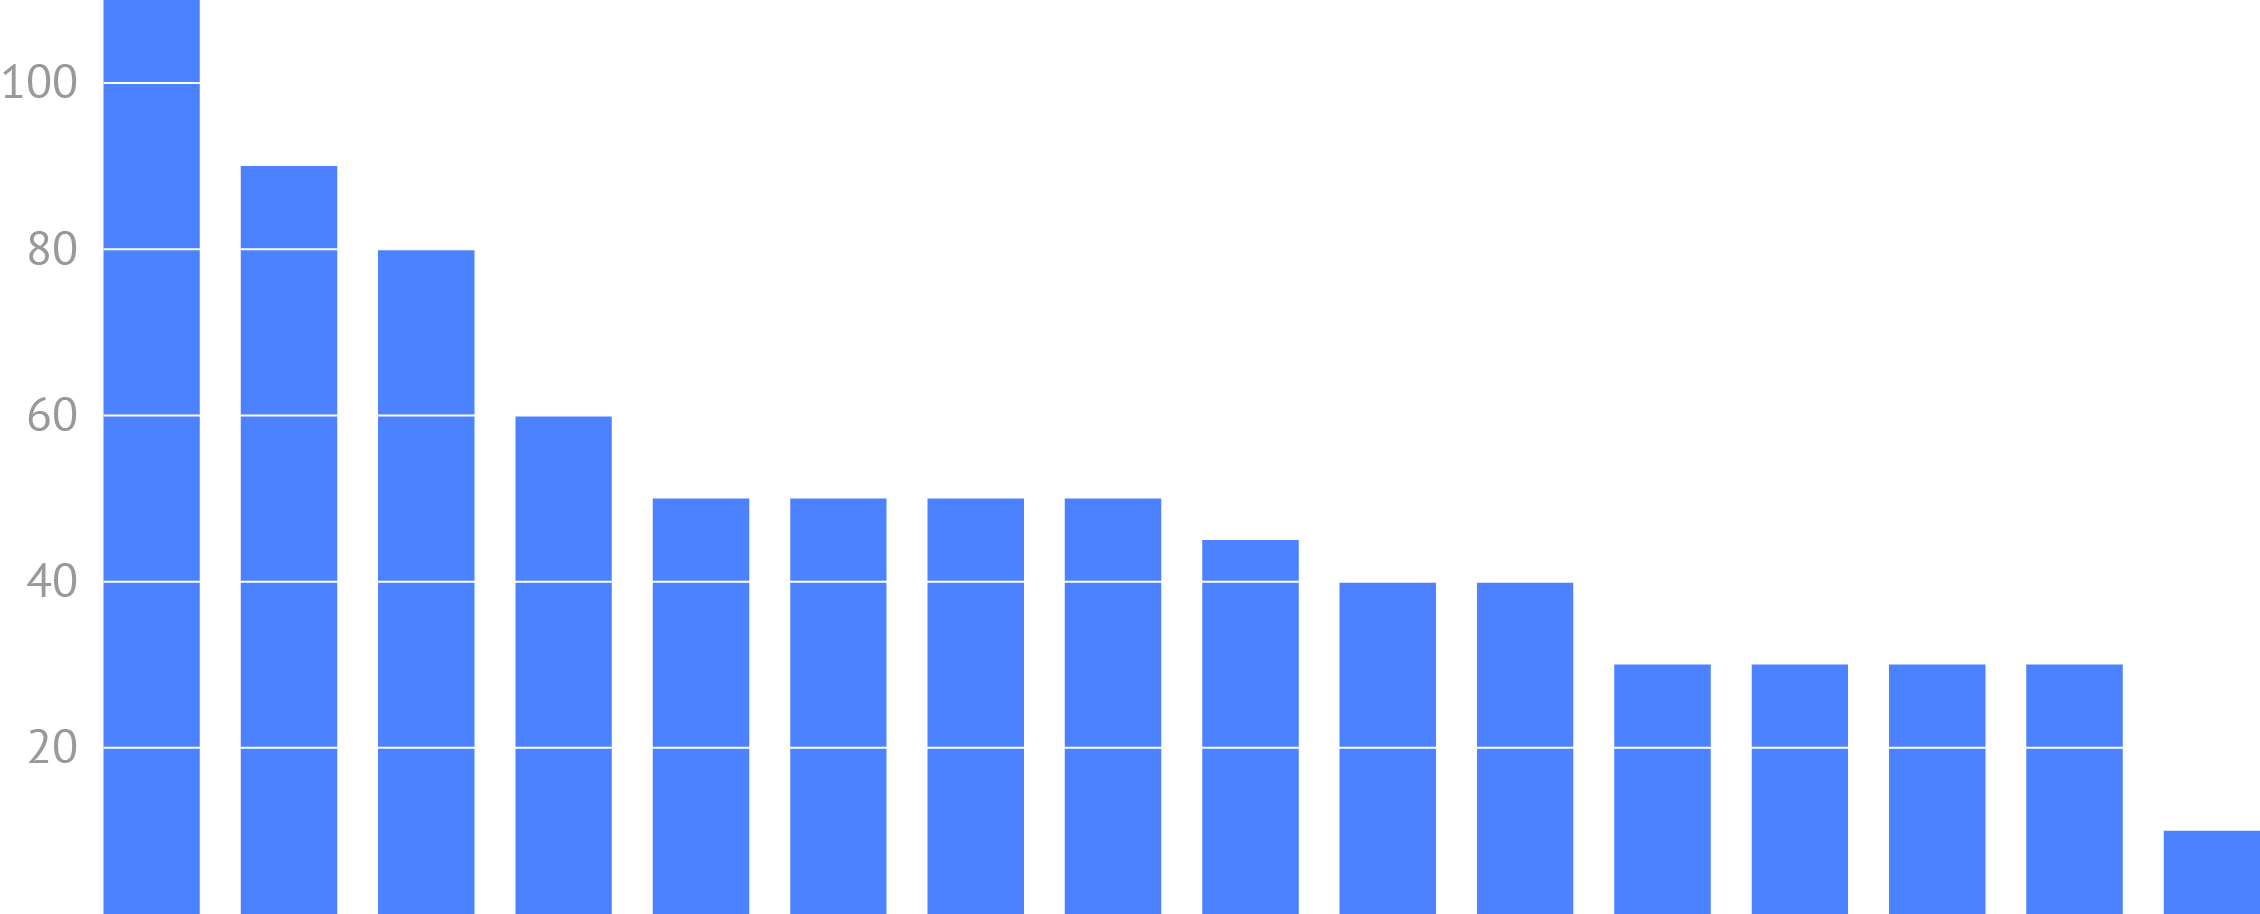 A vertical bar chart with 16 bars, creating a layout that is wider than it is high